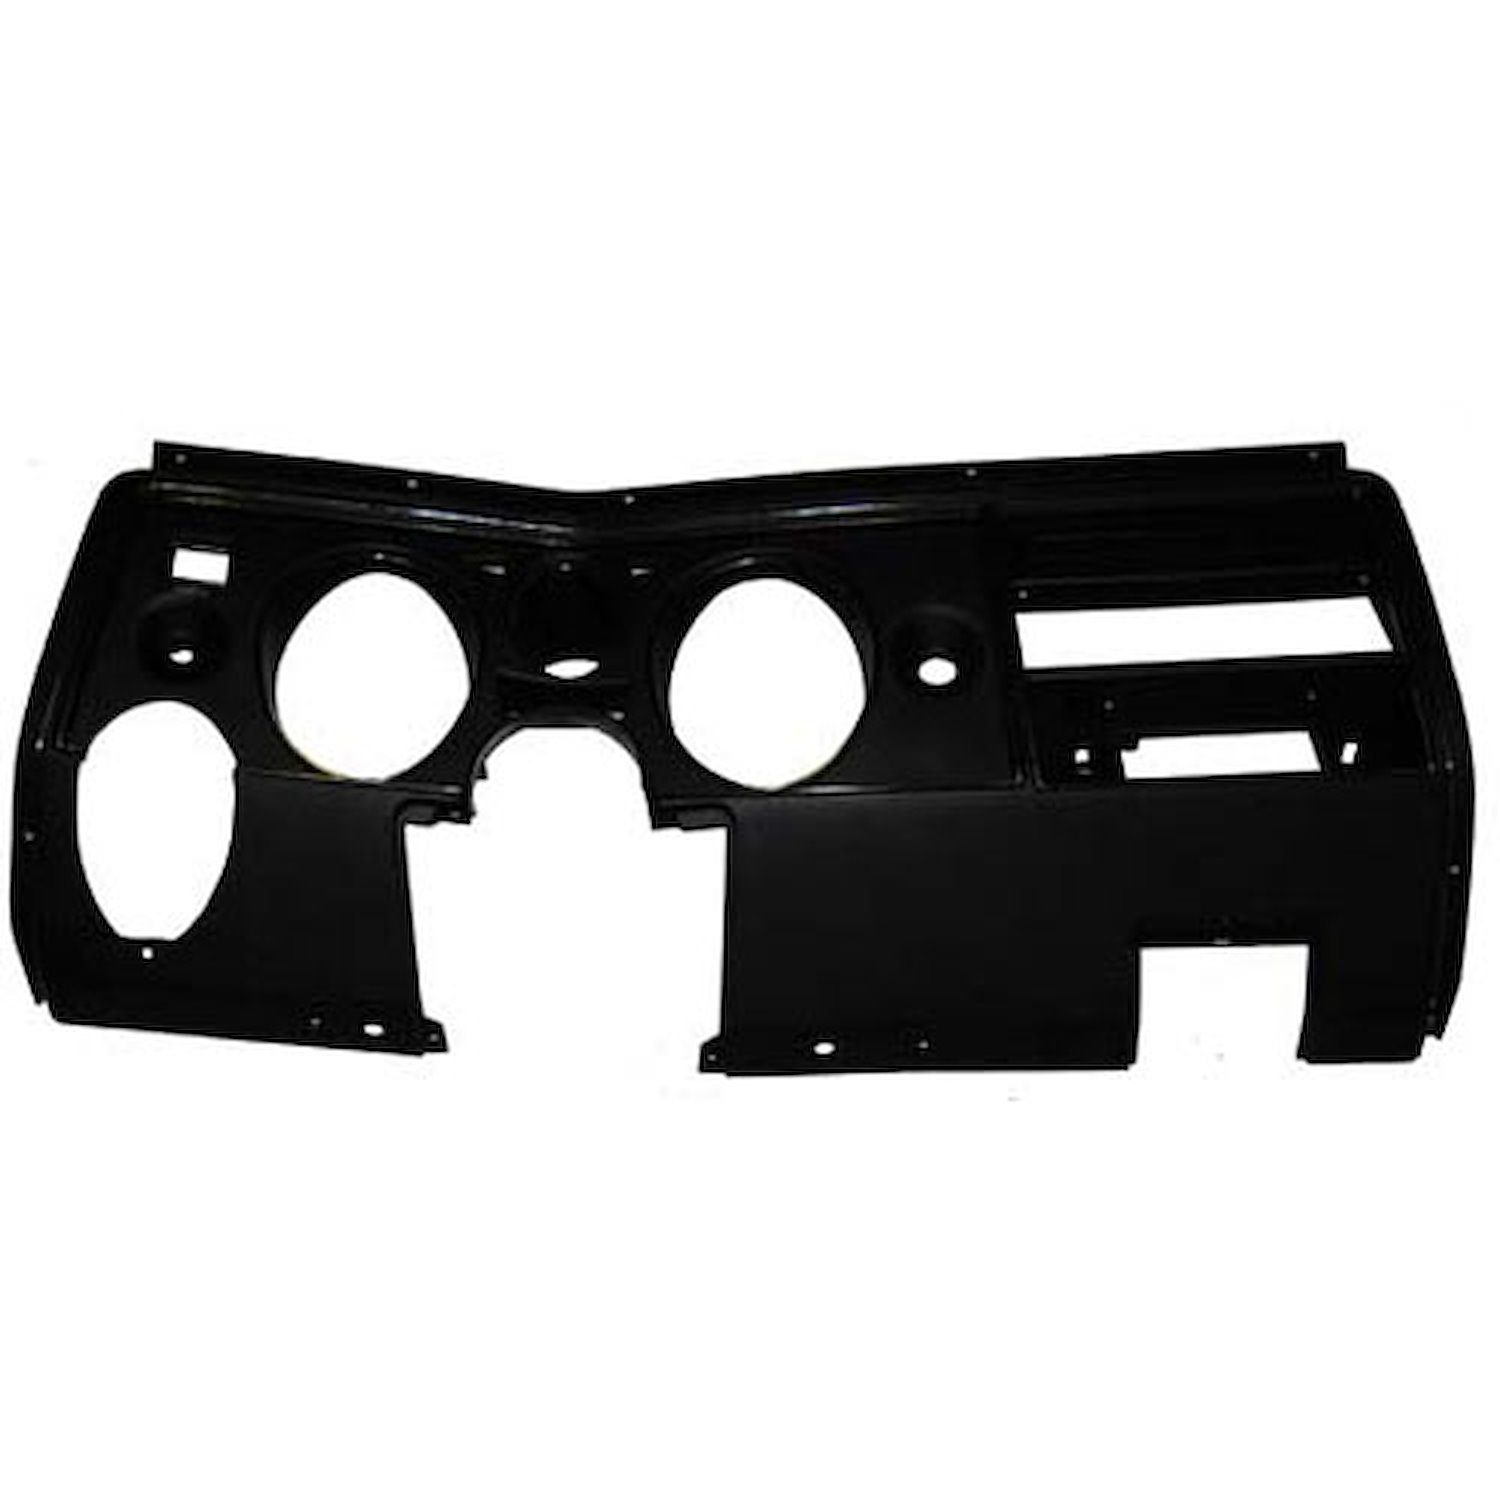 DP03-692 Instrument Panel 1969 Chevy Chevelle With Astro Ventilation Without AC